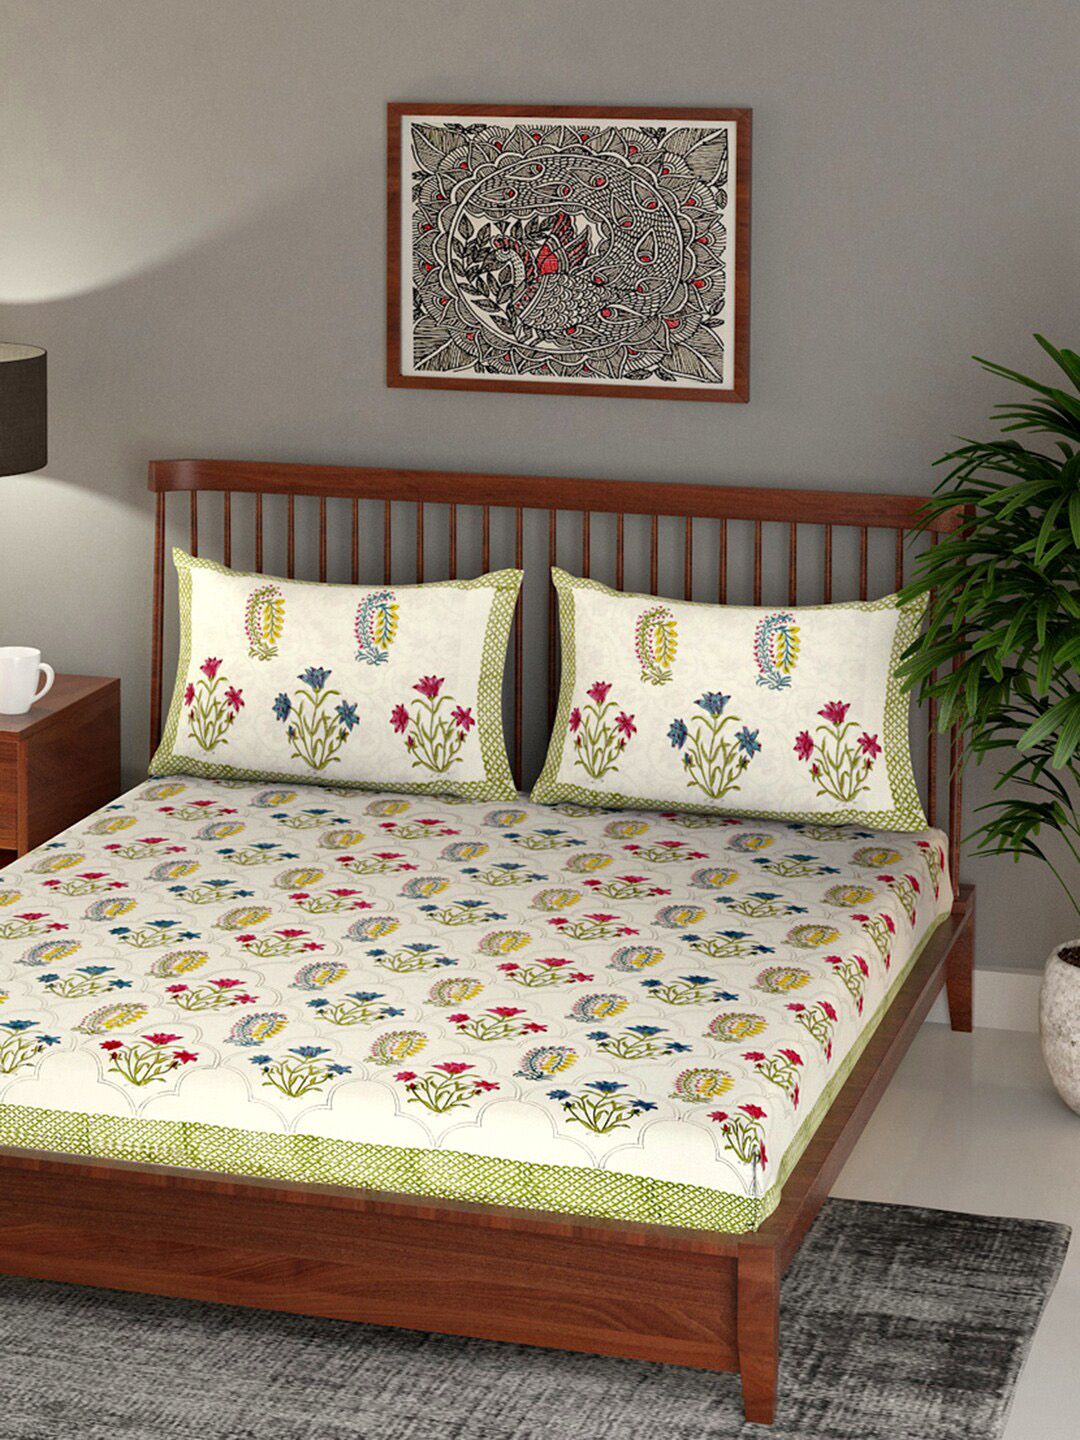 EK BY EKTA KAPOOR Cream-Coloured & Pink Floral 120 TC King Bedsheet with 2 Pillow Covers Price in India